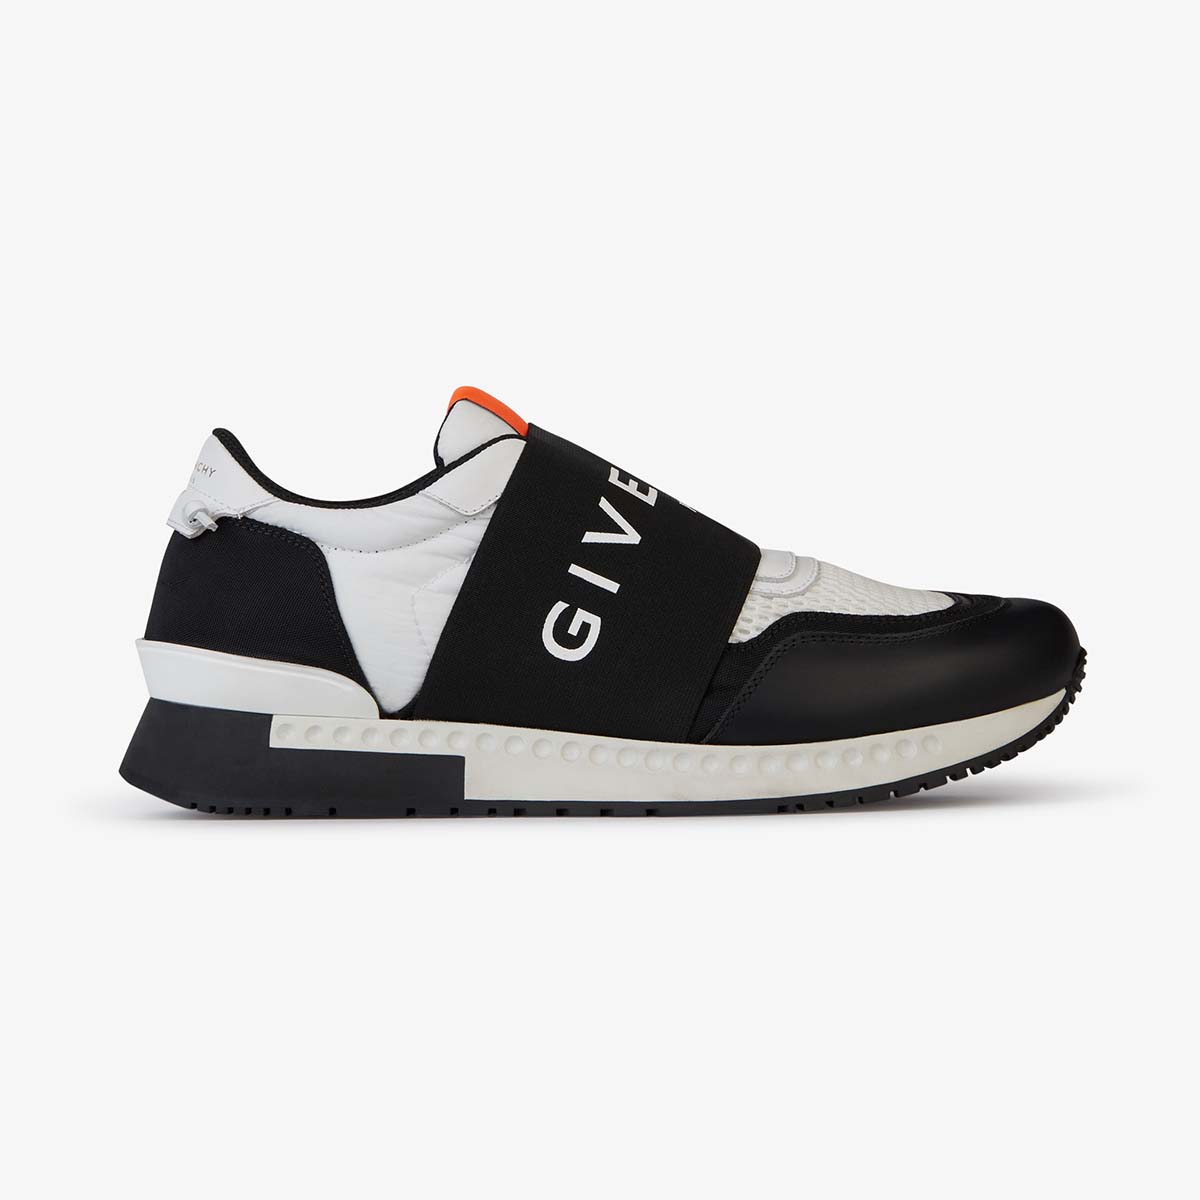 Givenchy Men Runner Elastic Sneakers in Leather and Nylon Shoes Black